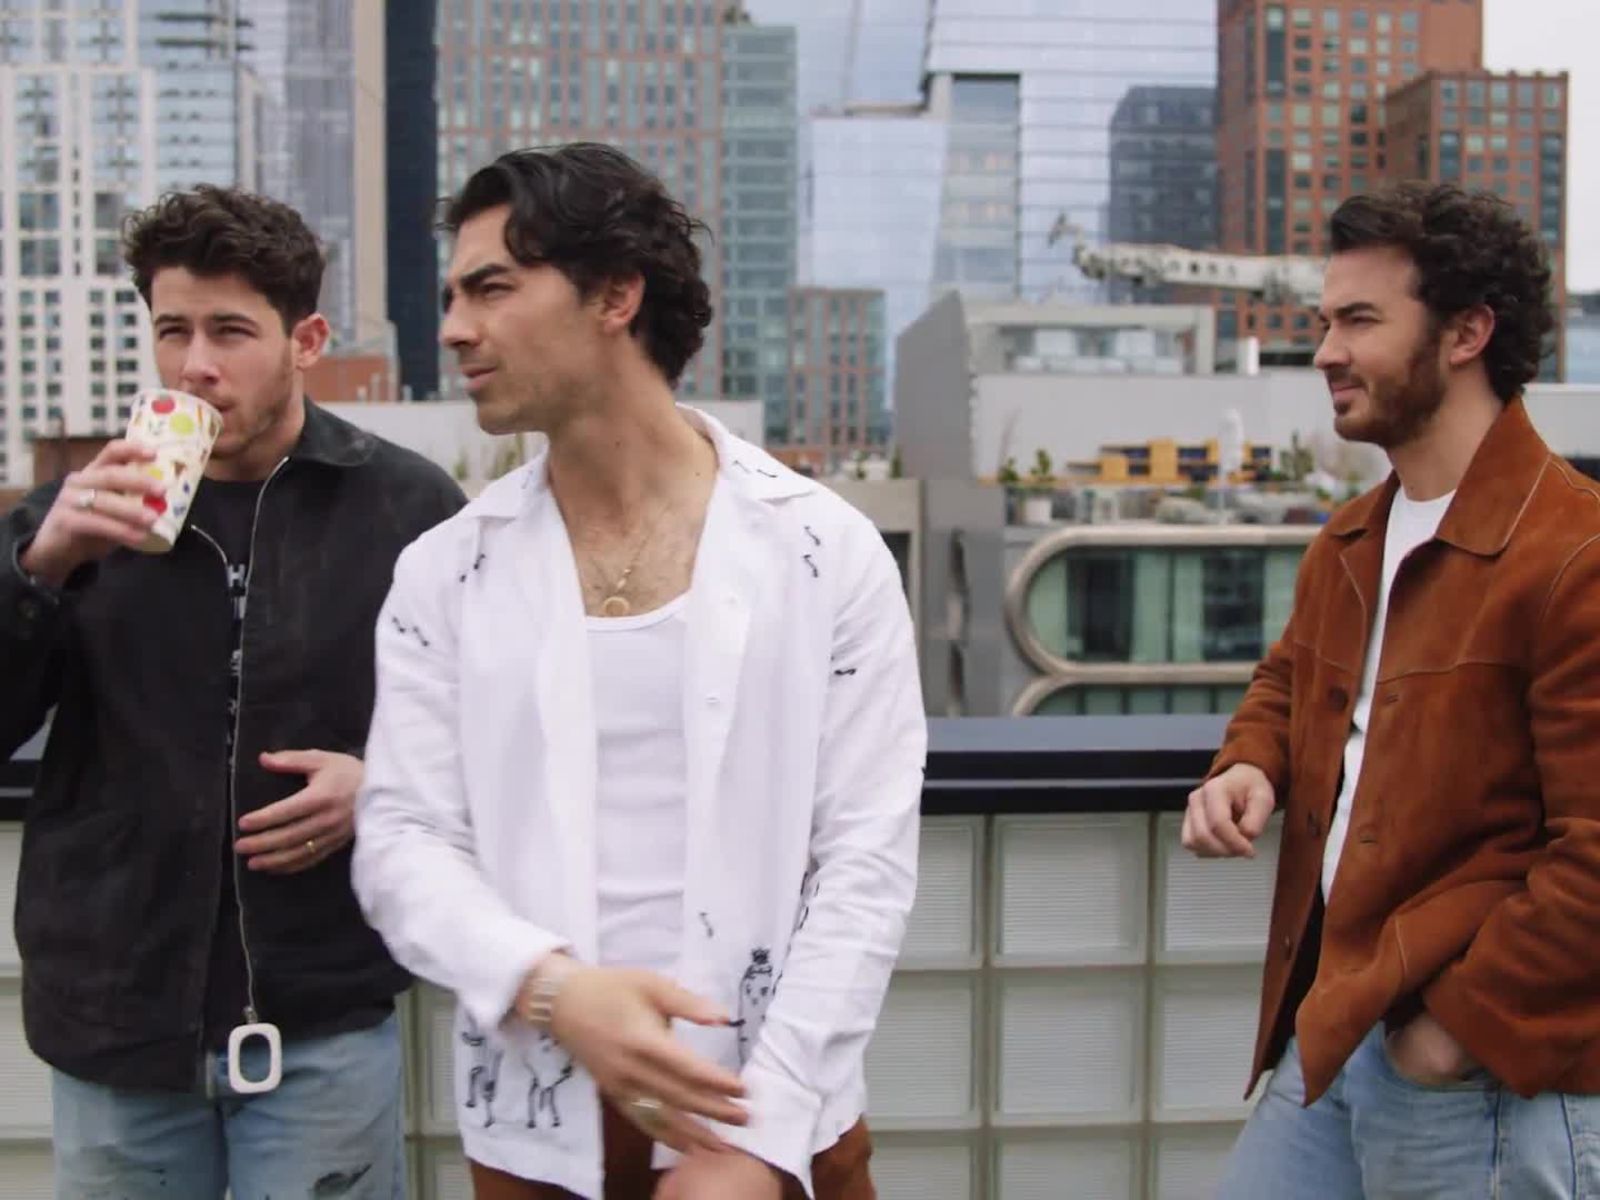 24 Hours of Sparkly Polos and Saturday Night Live Rehearsals with the Jonas Brothers